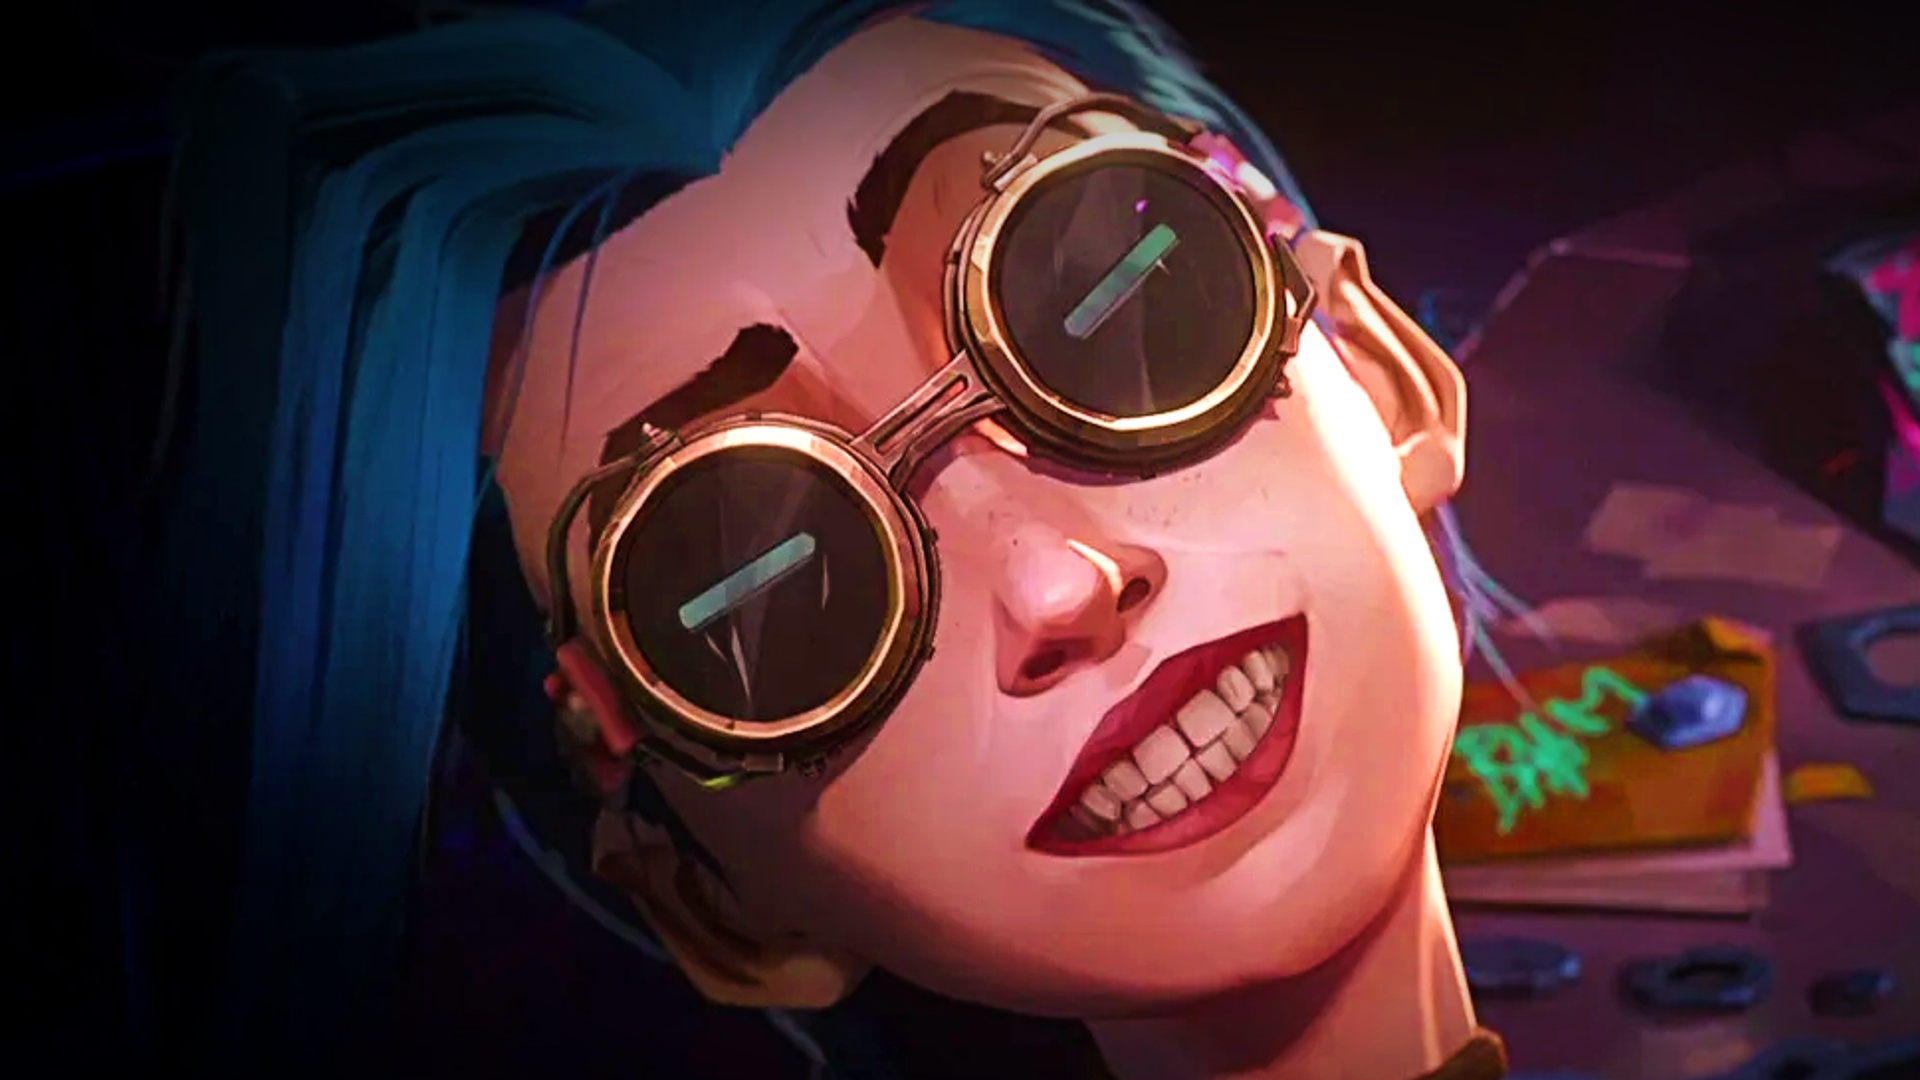 Arcane is officially canon, and from now on League of Legends lore is going  to stop contradicting itself all over the place, says Riot